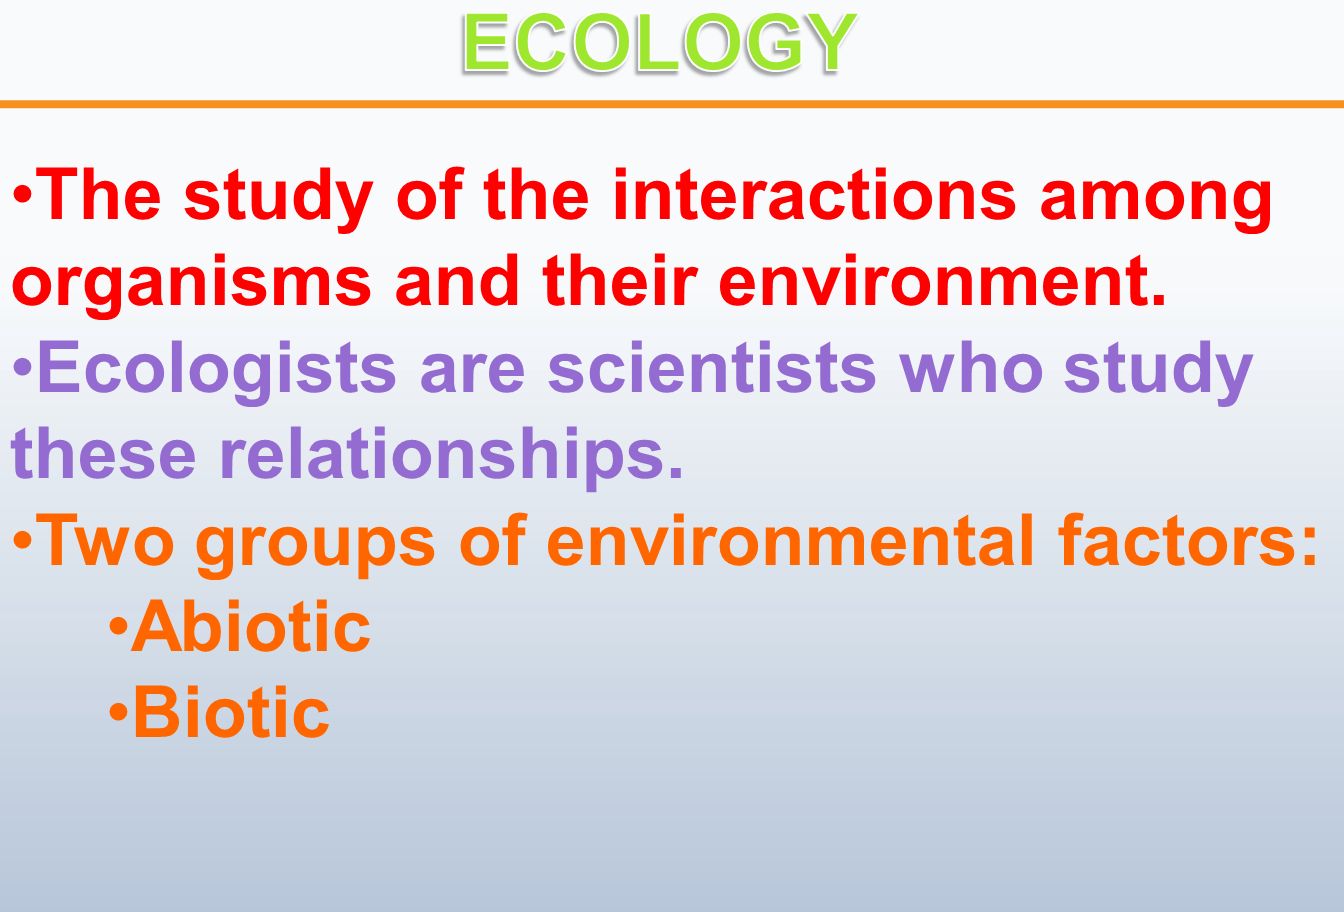 The study of the interactions among organisms and their environment.